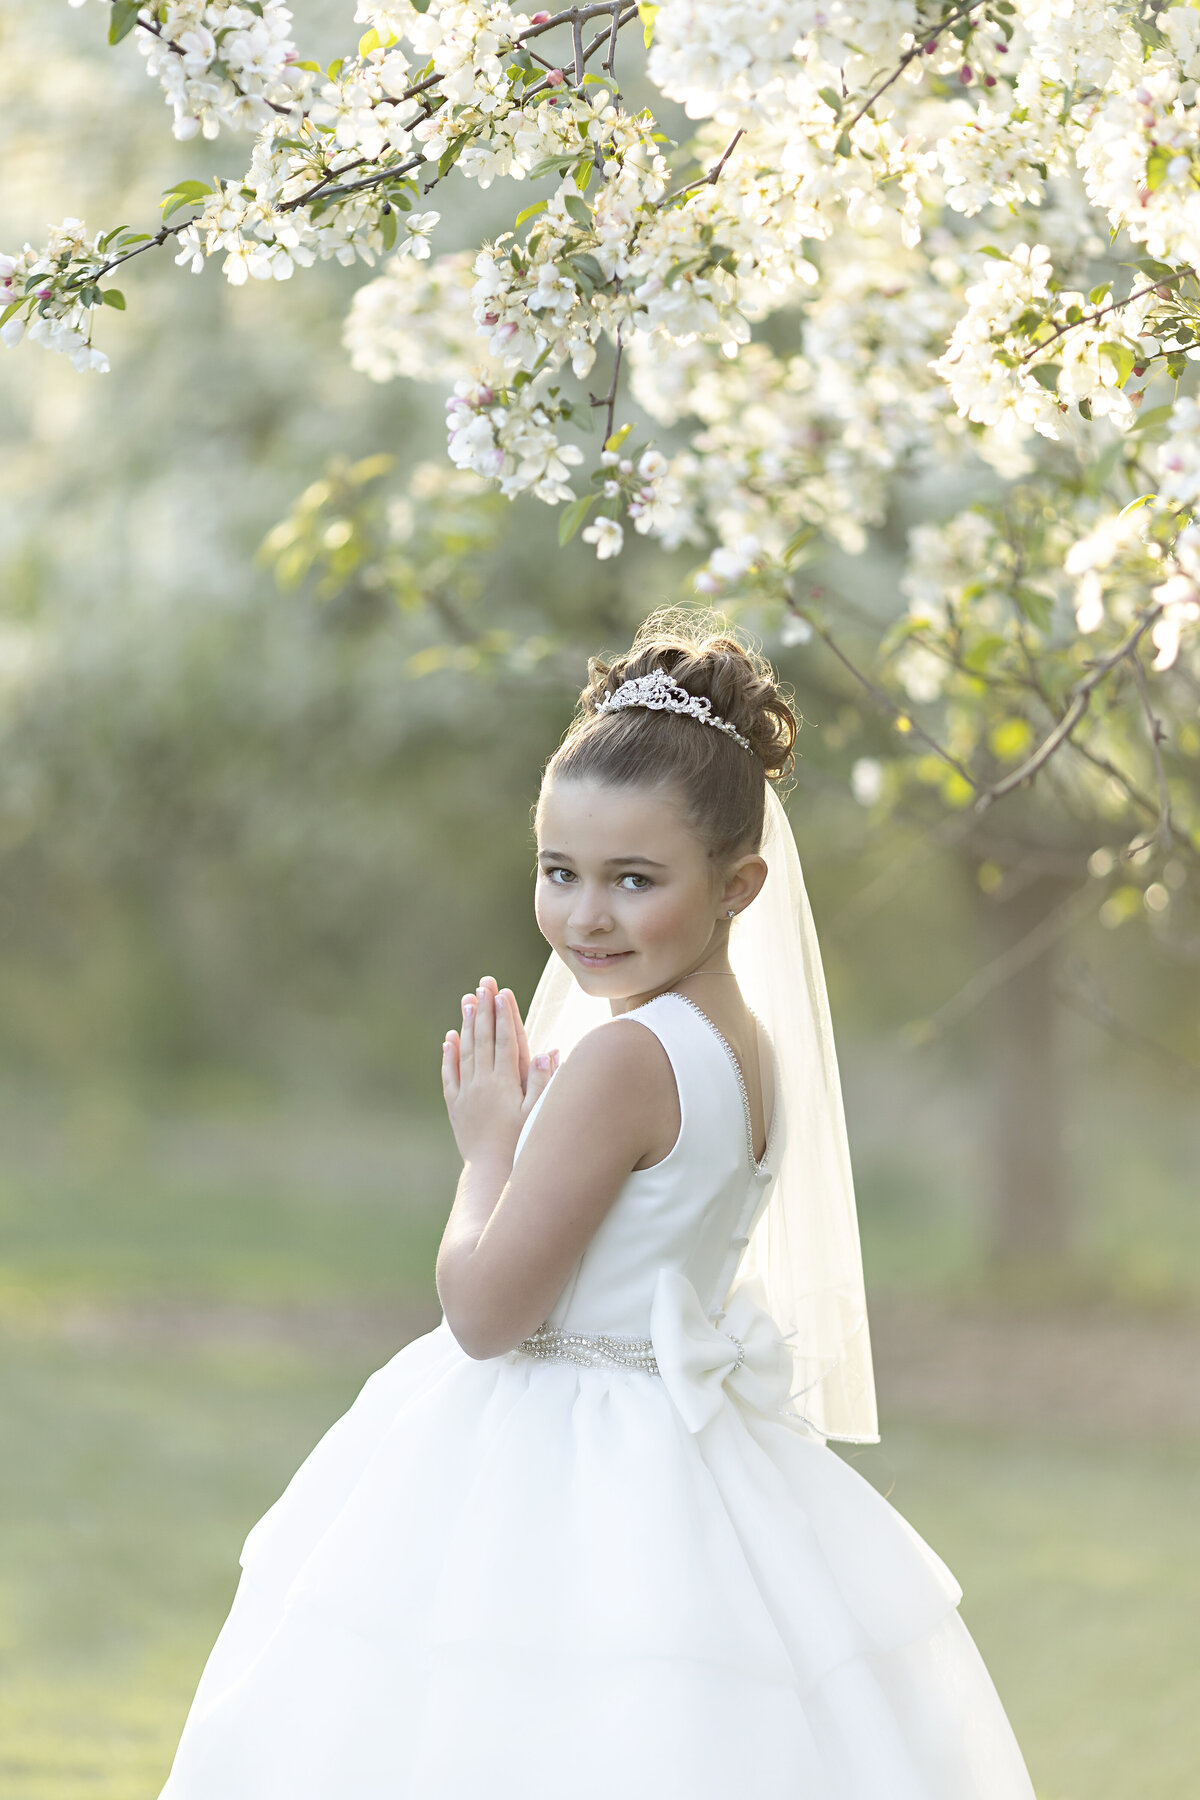 A praying young girl in a sleeveless whwite dress with a large boy under a white flowering tree